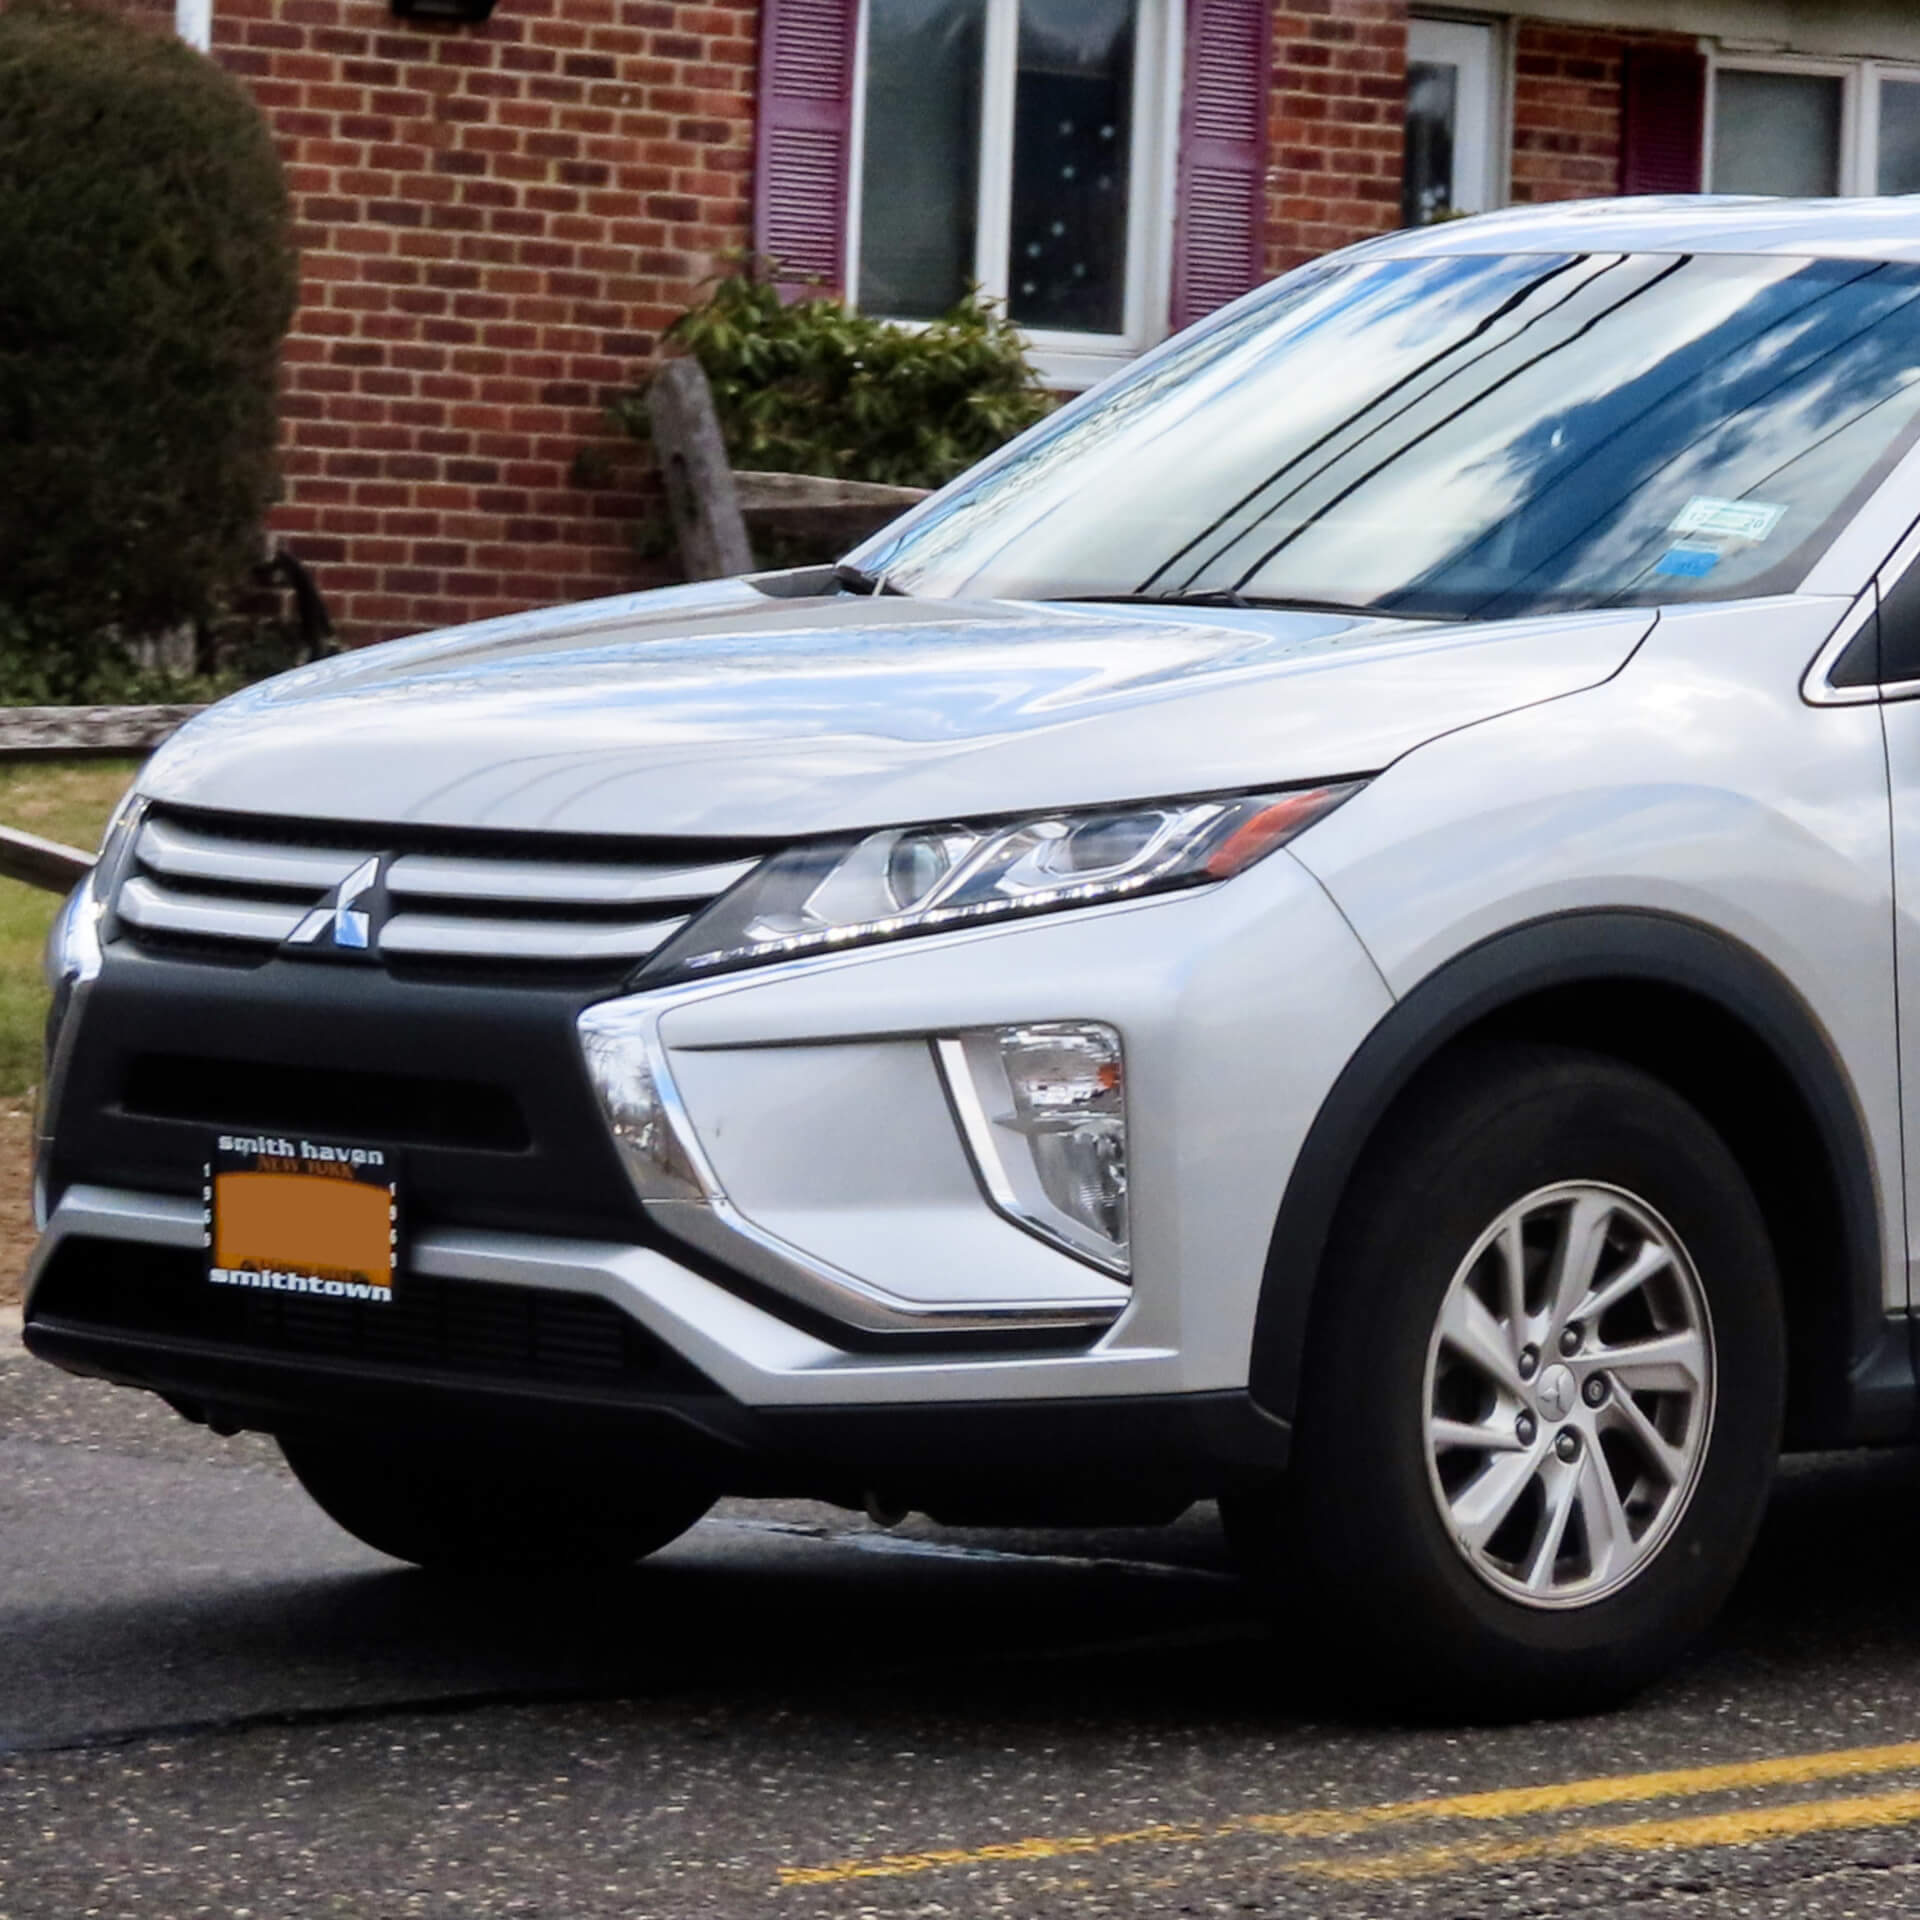 Direct4x4 accessories for Mitsubishi Eclipse Cross vehicles with a photo of the front of a silver Mitsubishi Eclipse Cross parked outside a house